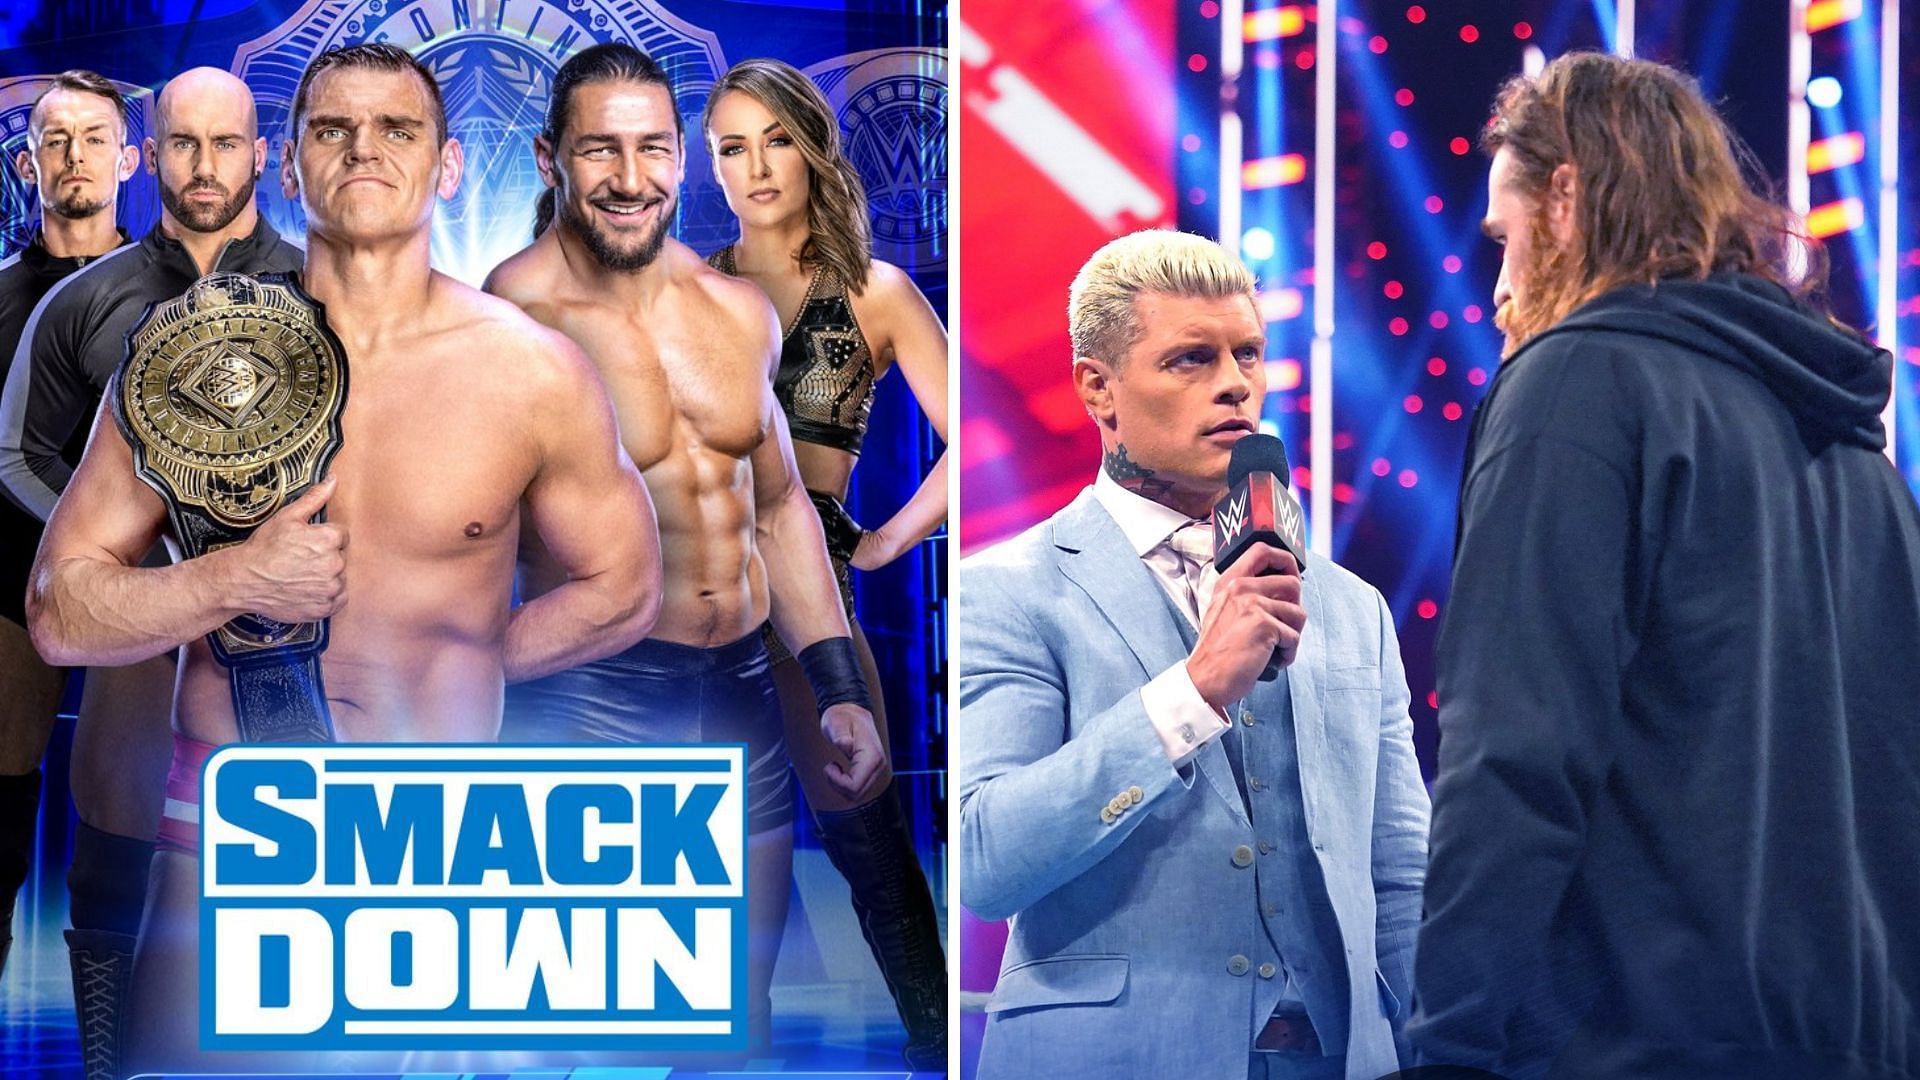 WWE SmackDown (Feb 17) Location & Match Card Where is WWE SmackDown